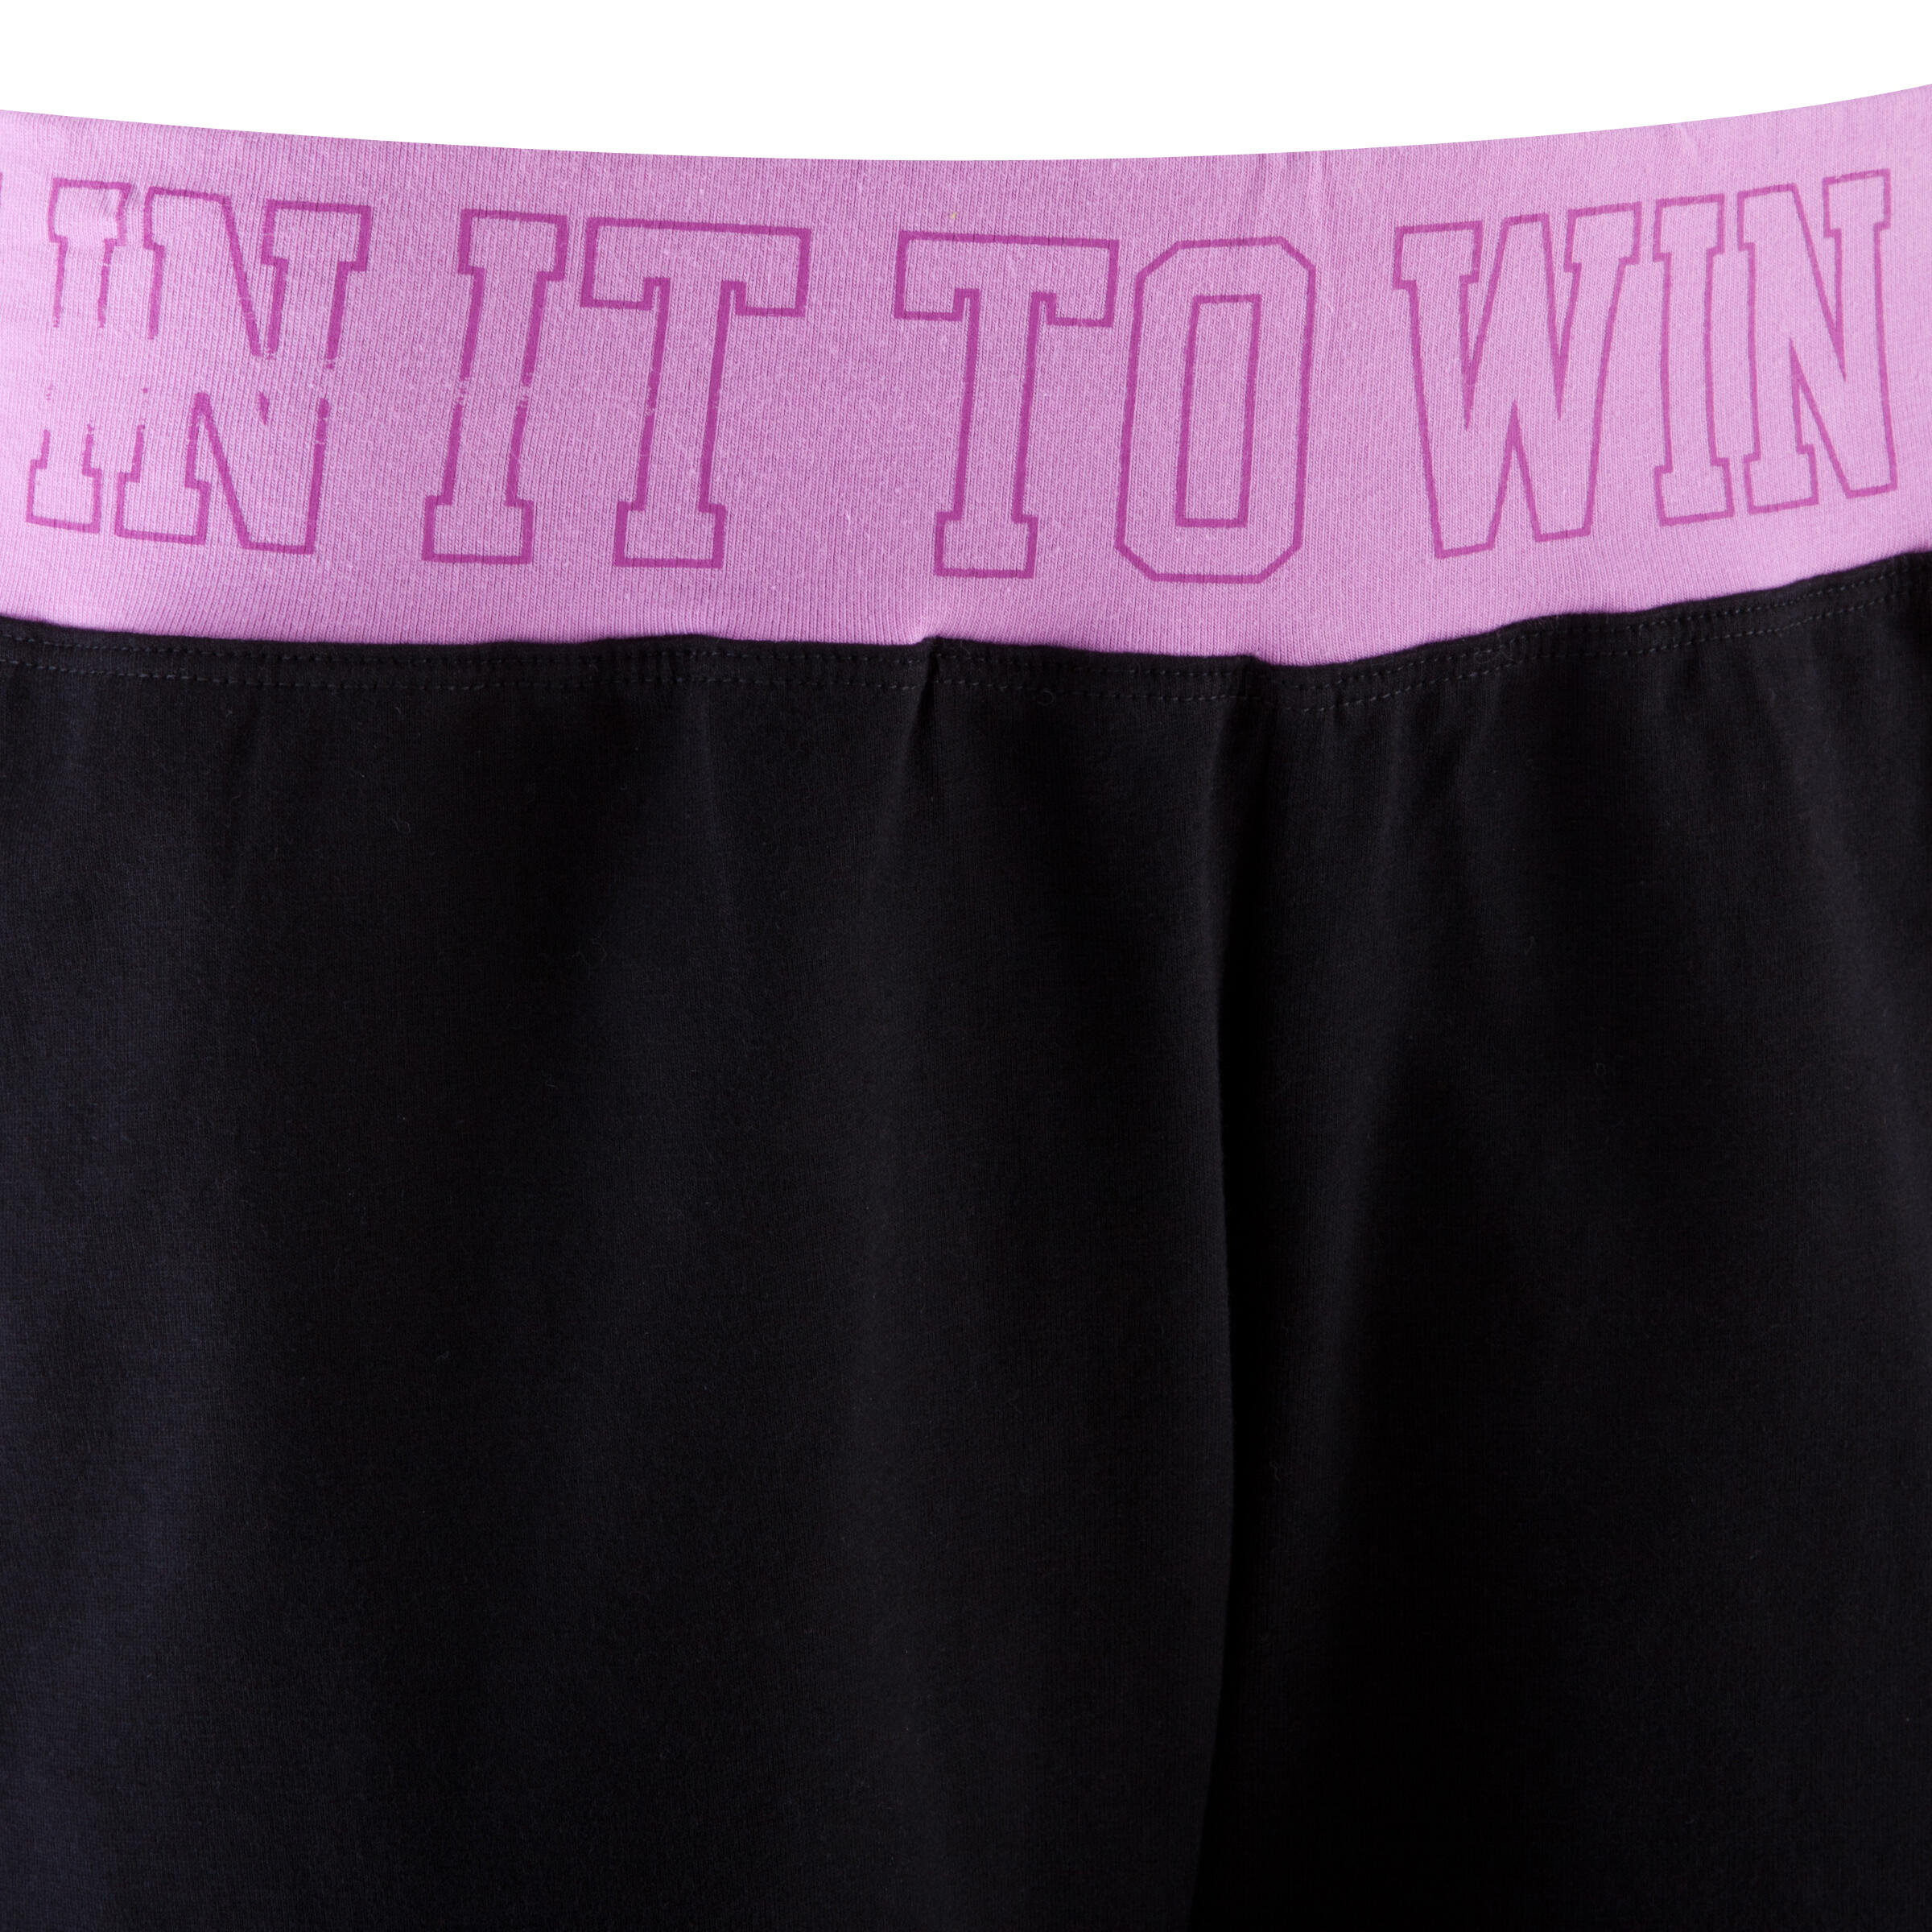 Women's Fitness Shorts with Contrasting Print Waistband - Black/Pink 7/11